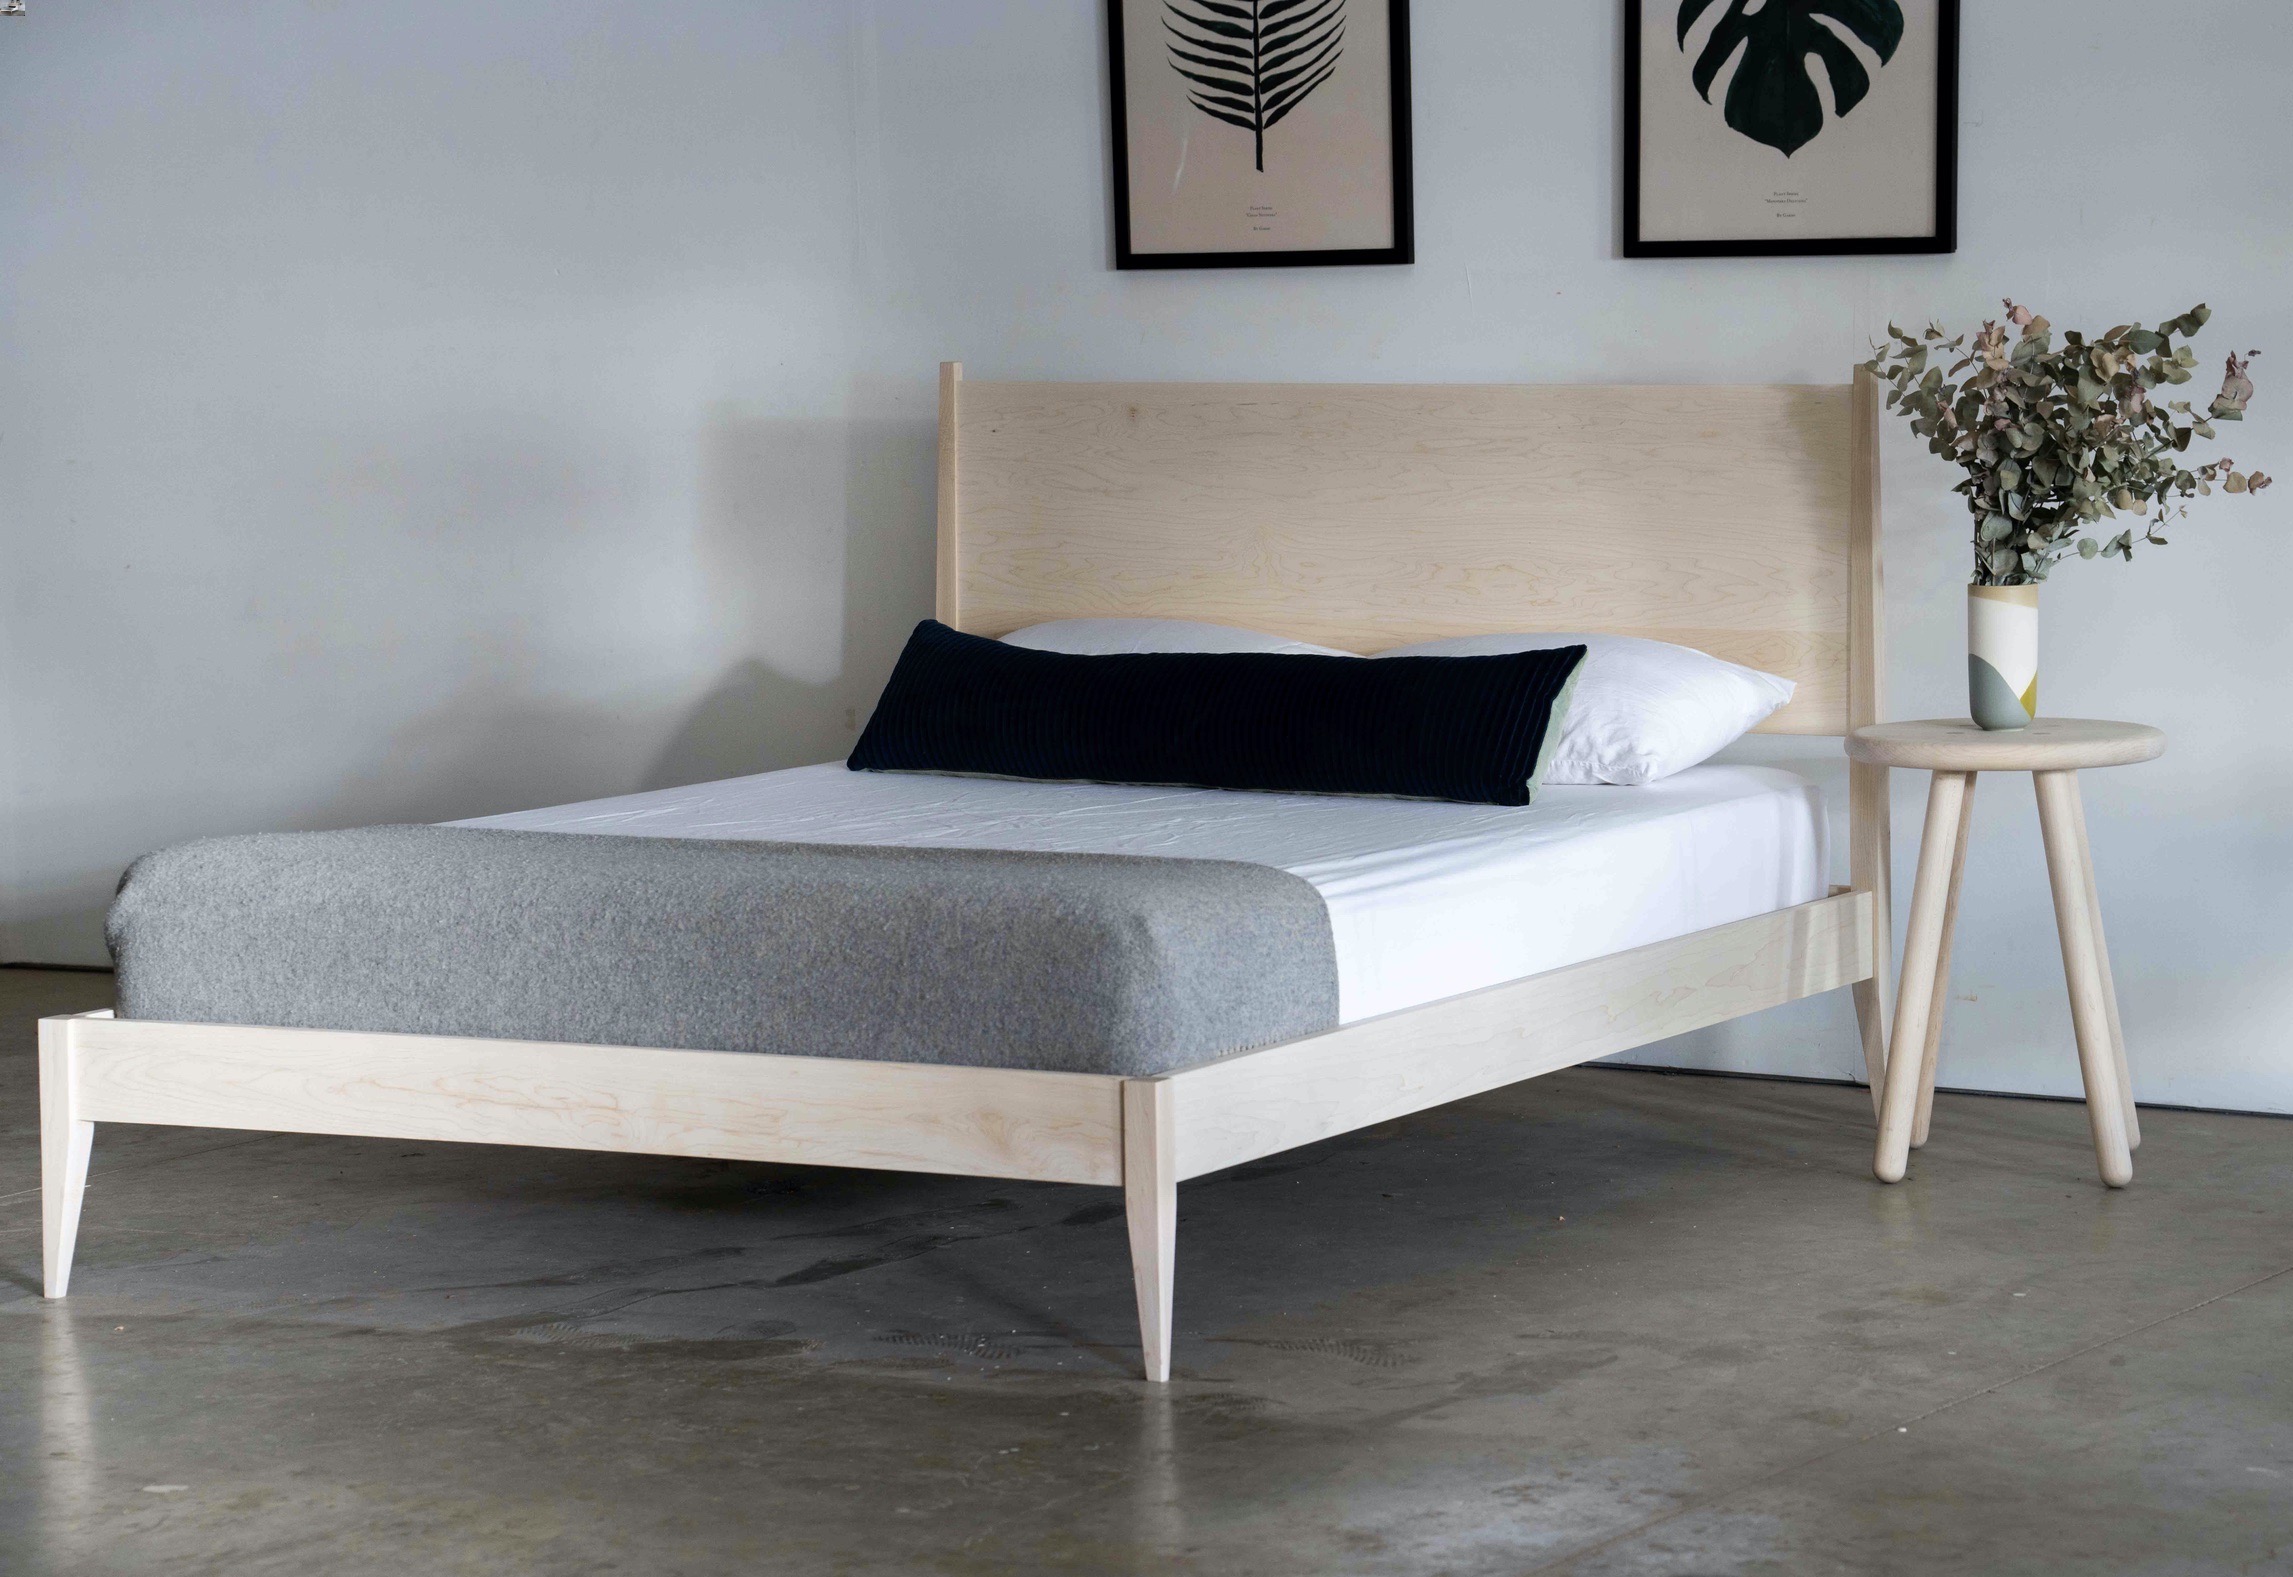 A maple shaker style midcentury modern bed with tapered legs. A mattress, pillows, and a gray blanket are on the bed.